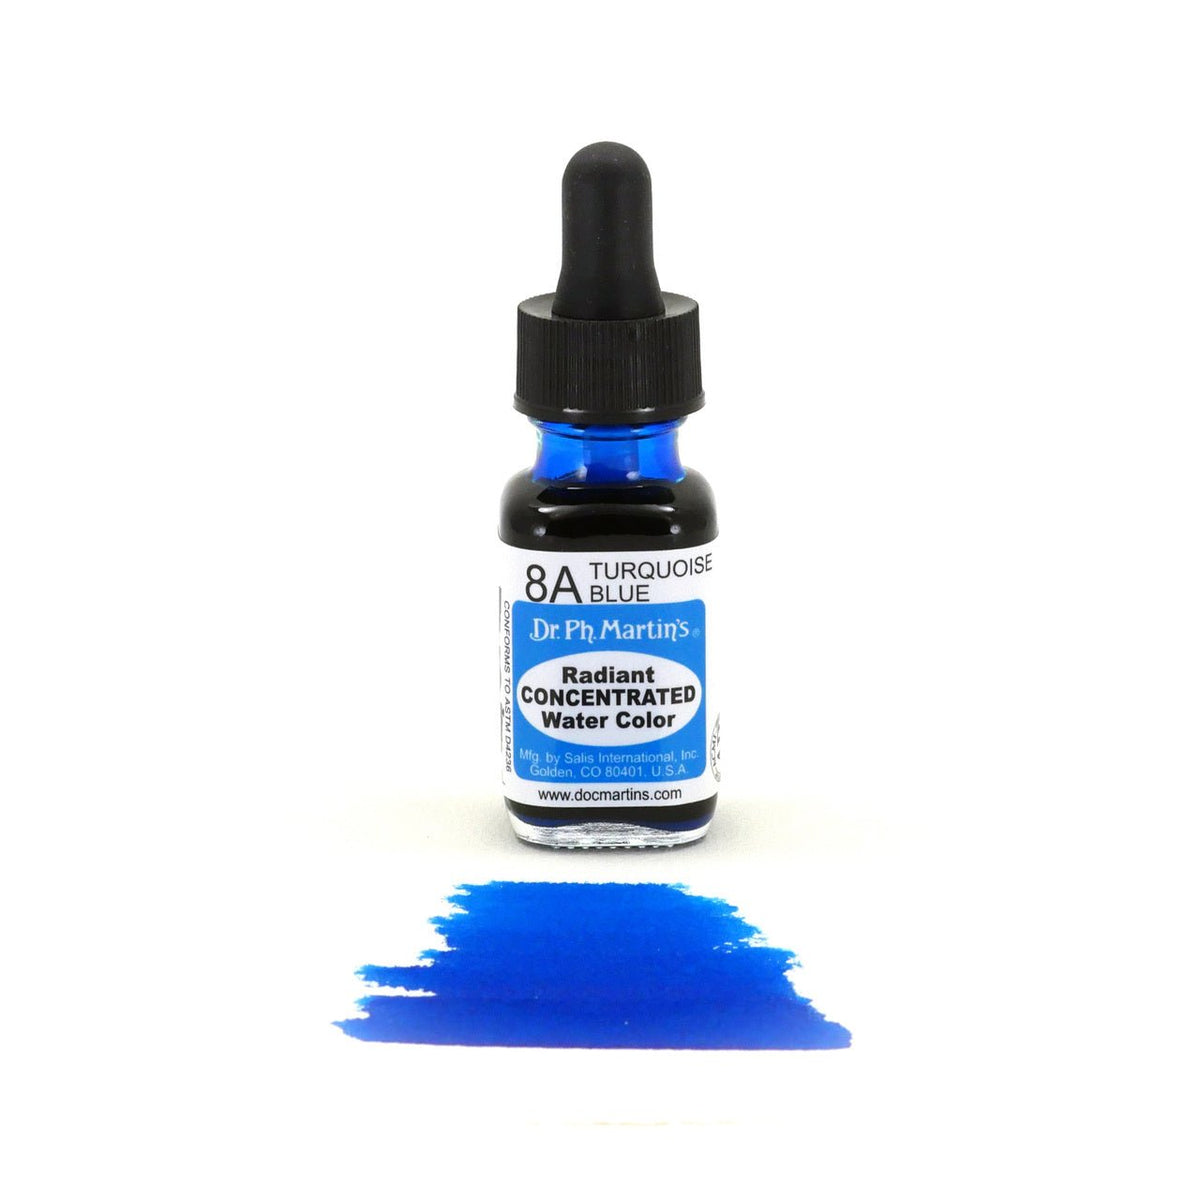 Dr. Ph. Martin's Radiant Watercolor .5 oz - Turquoise Blue - merriartist.com